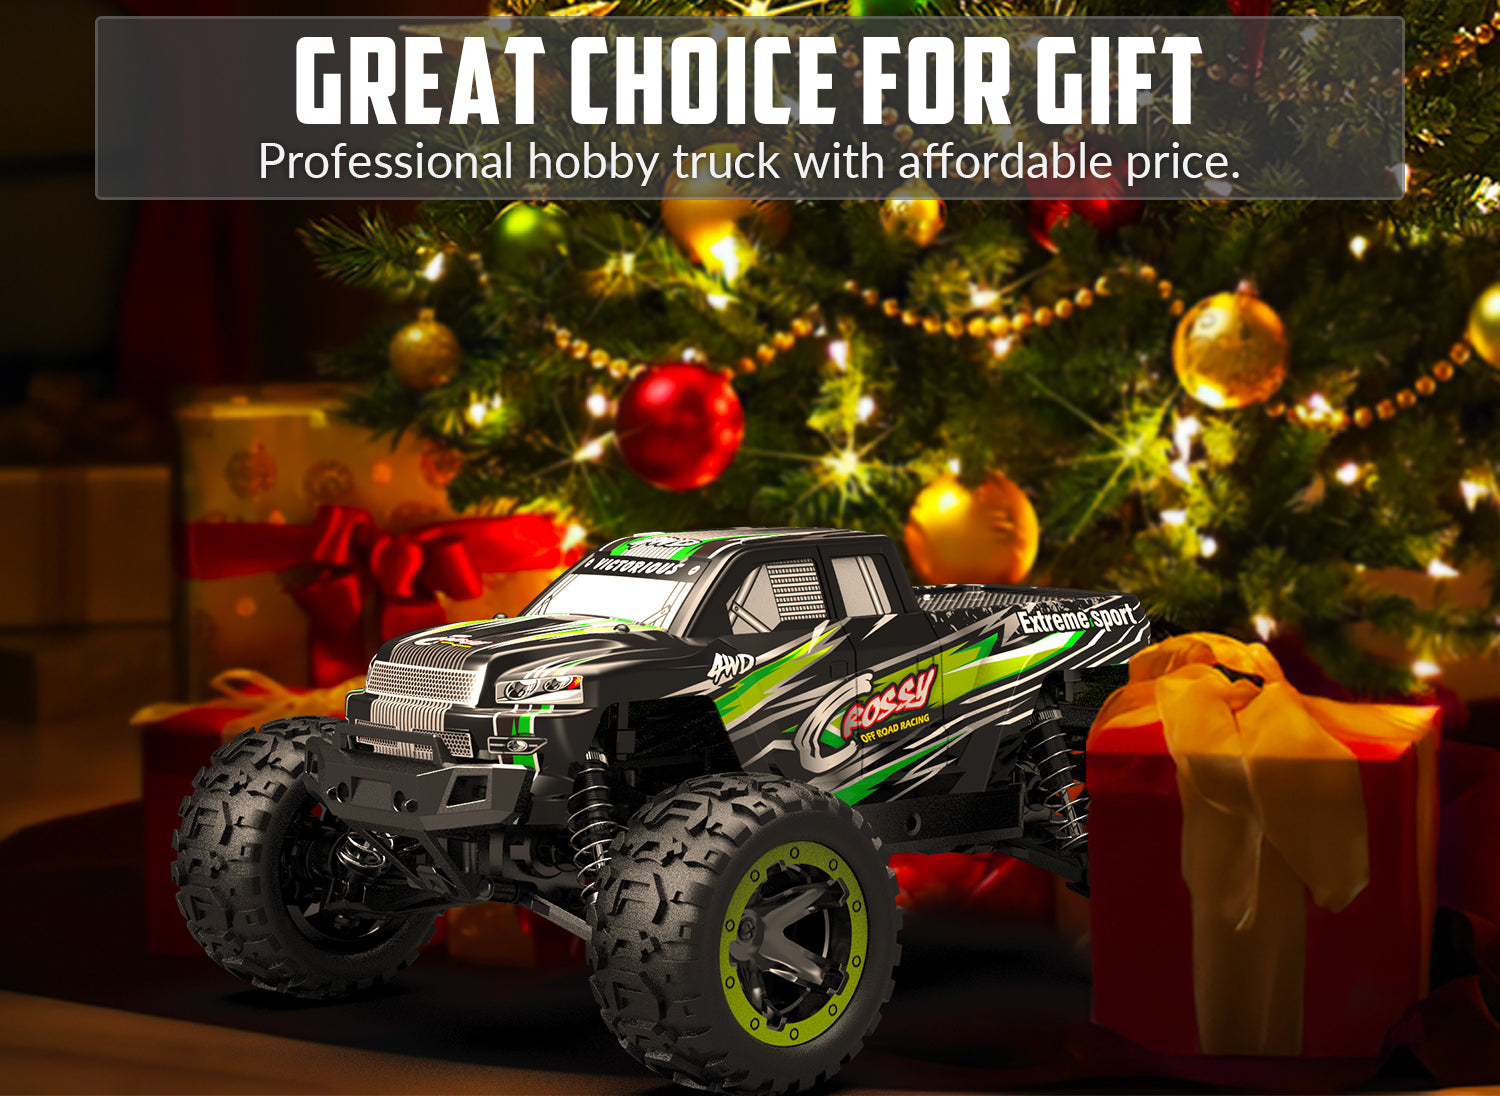 RACENT Crossy 1/16 RC Truck 30mph High Speed Racing Remote Control Car Great Gift